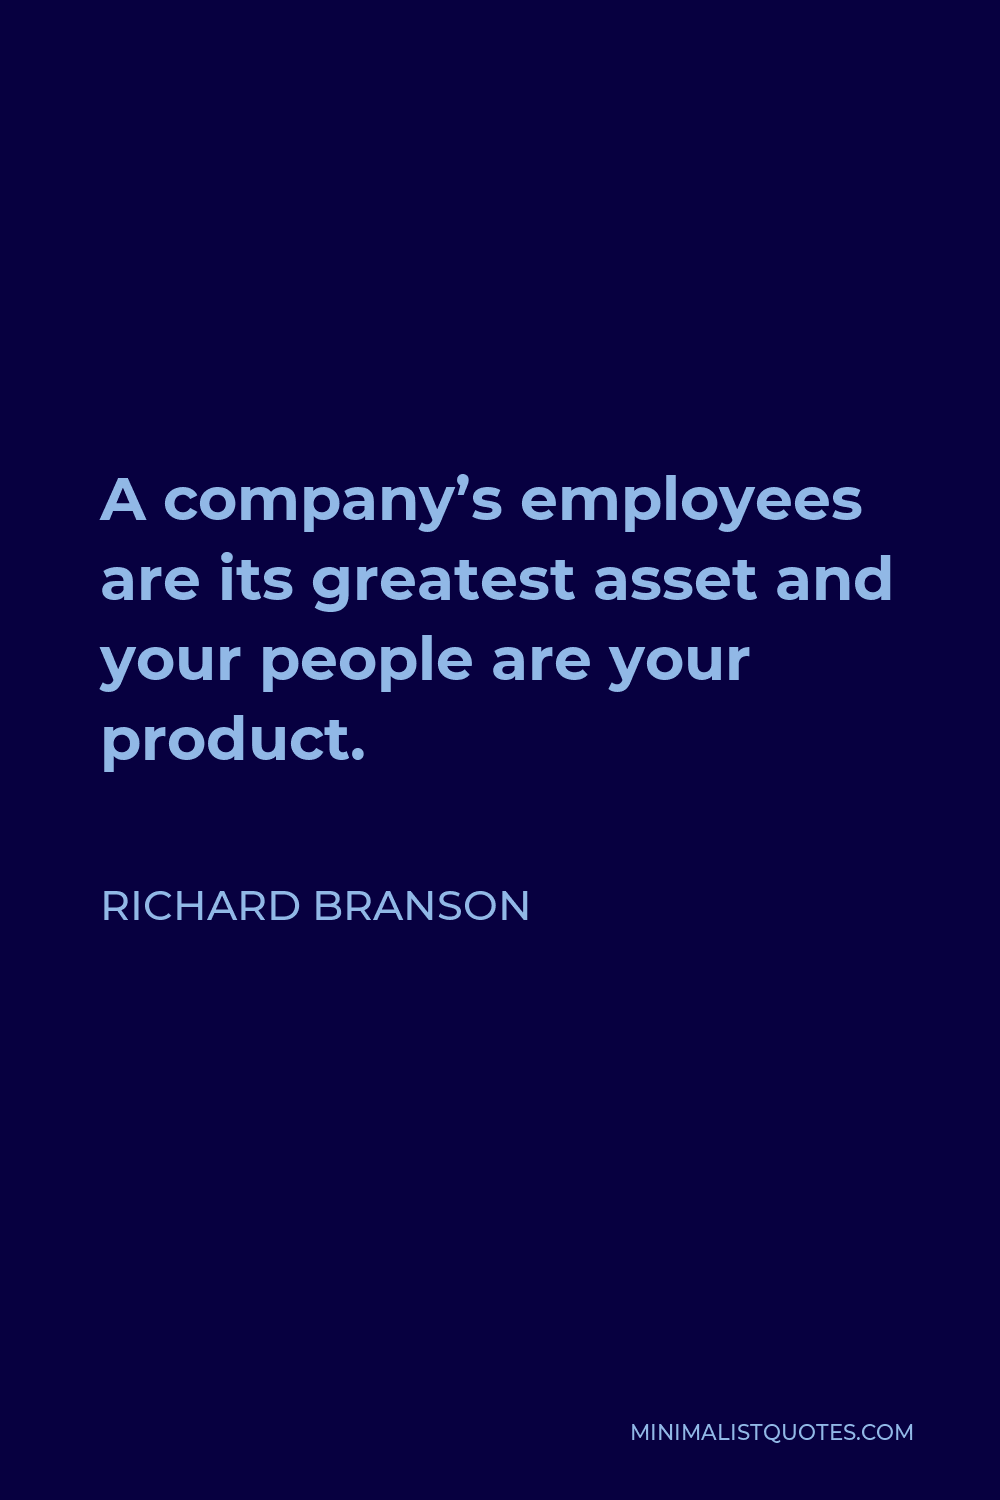 Richard Branson Quote - A company’s employees are its greatest asset and your people are your product.